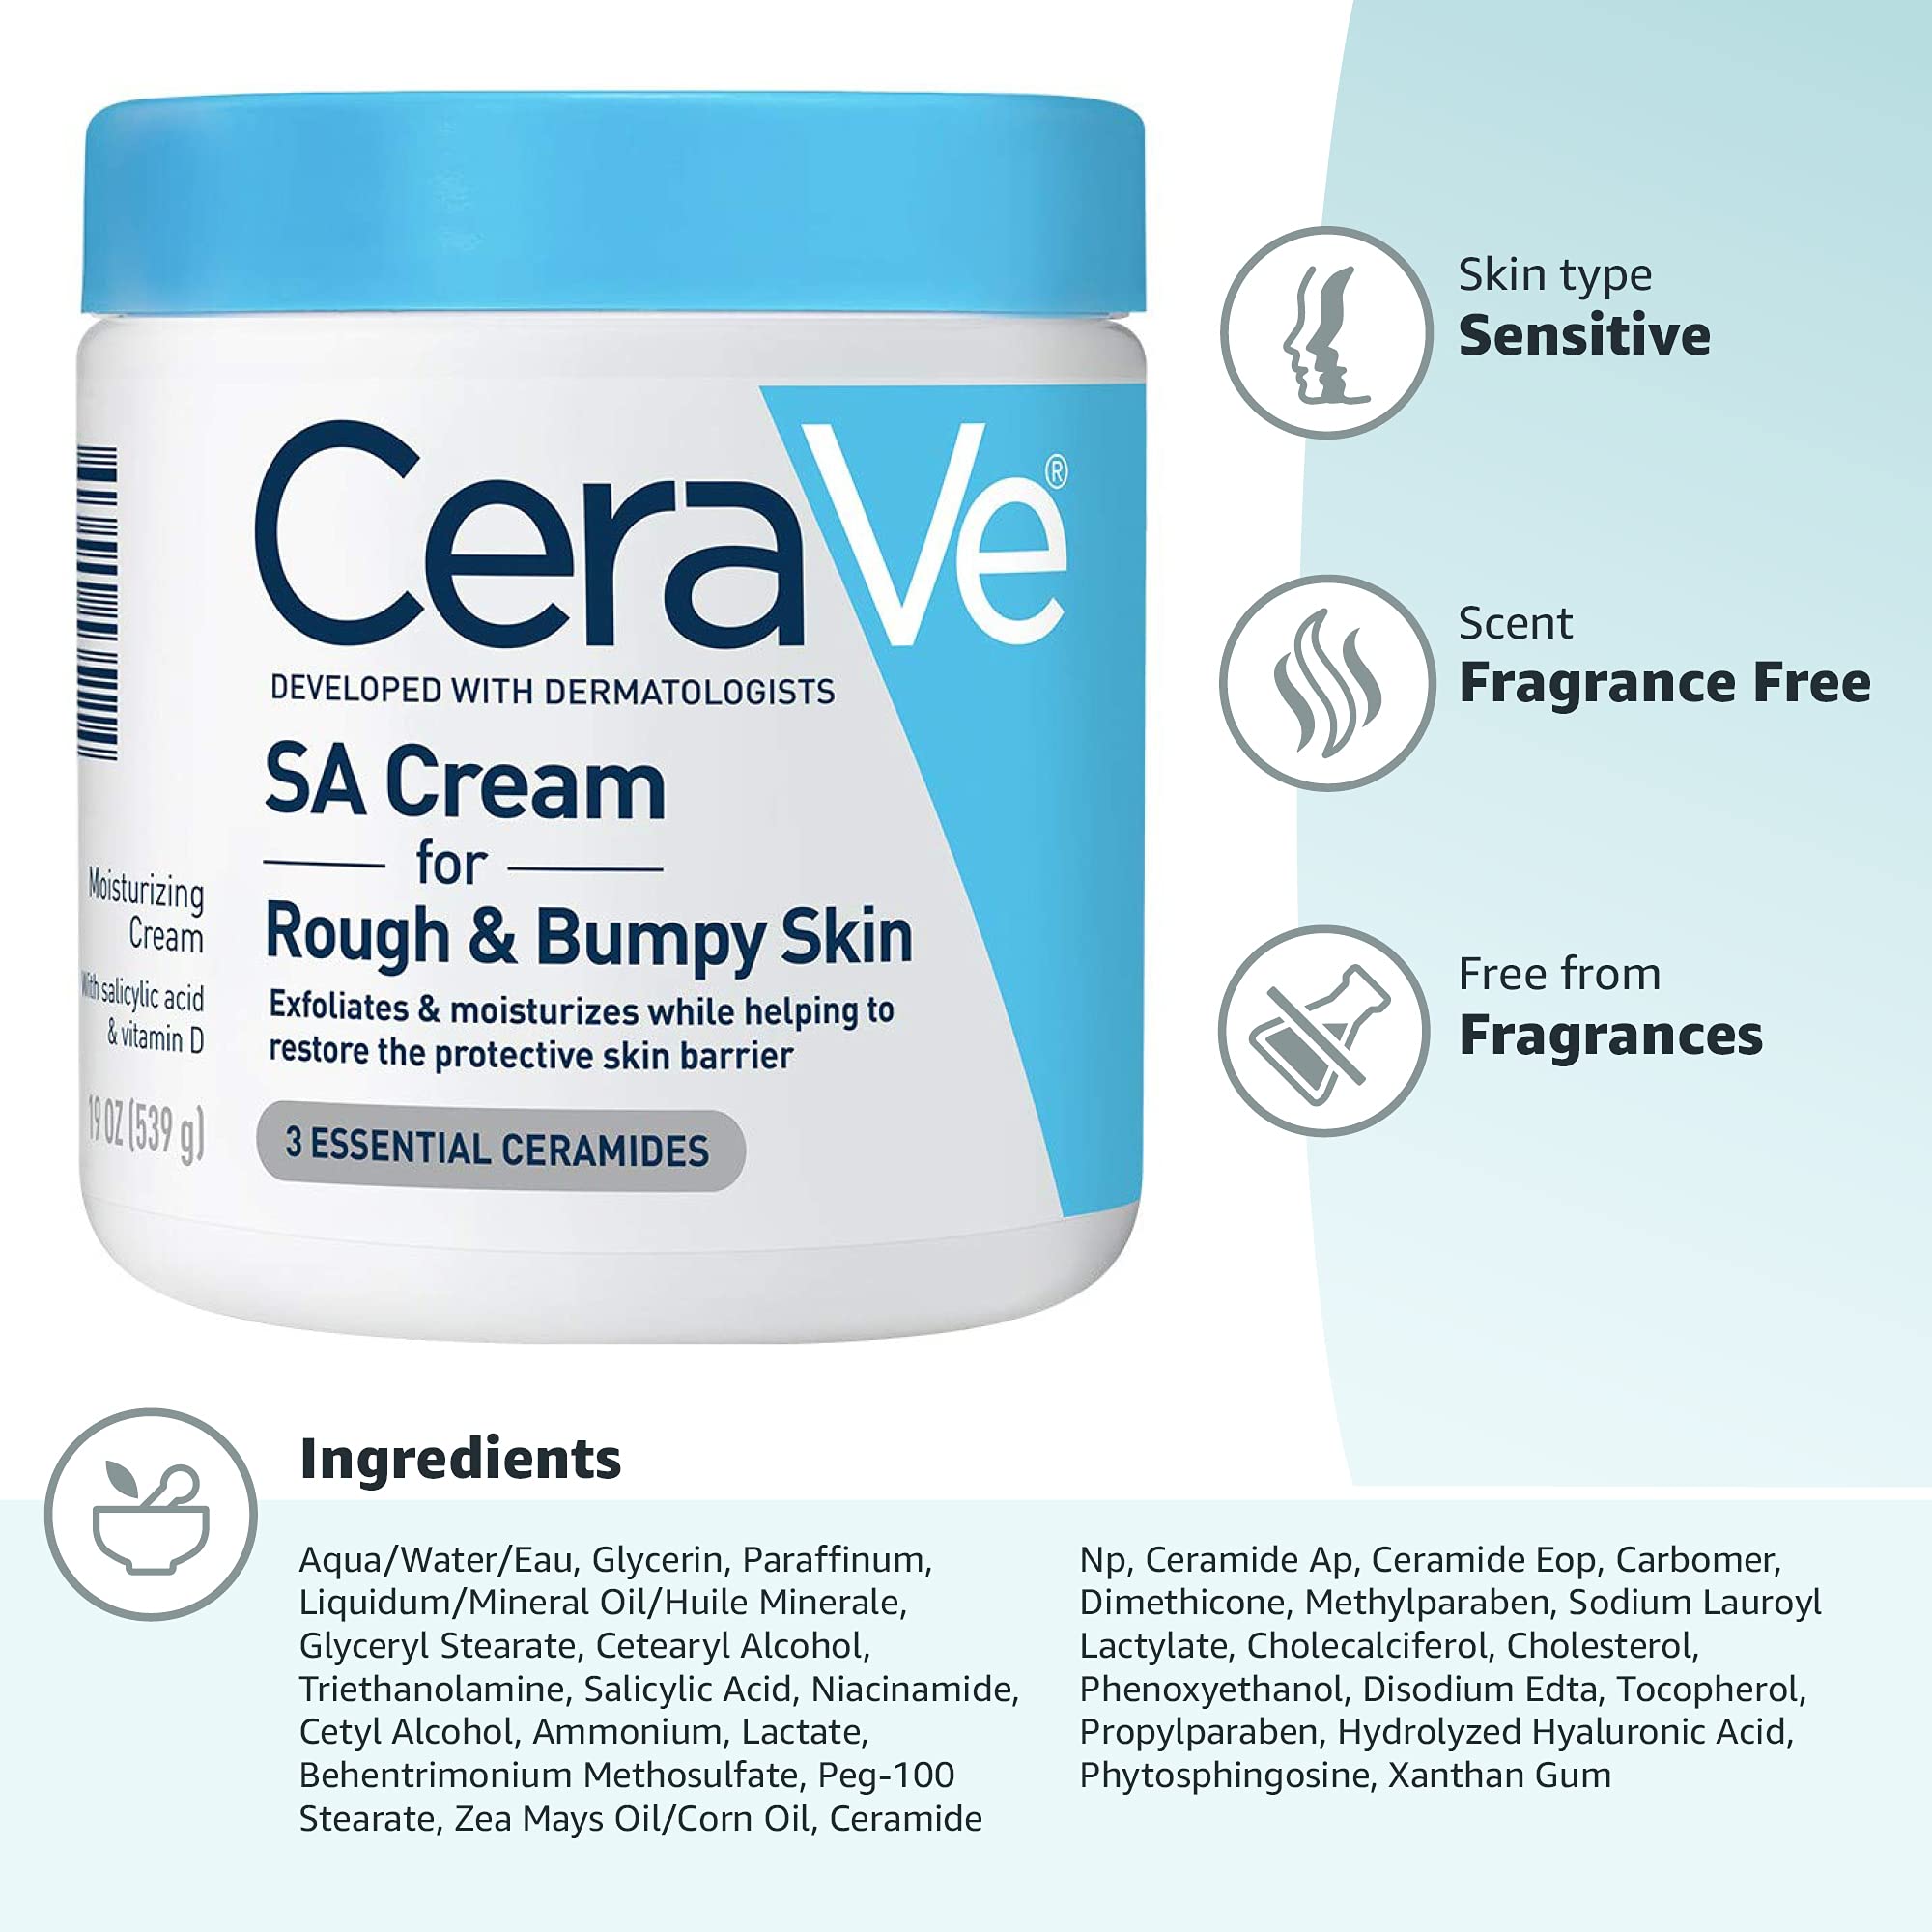 CeraVe Moisturizing Cream with Salicylic Acid | Exfoliating Body Cream with Lactic Acid, Hyaluronic Acid, Niacinamide, and Ceramides | Fragrance Free & Allergy Tested | 19 Ounce